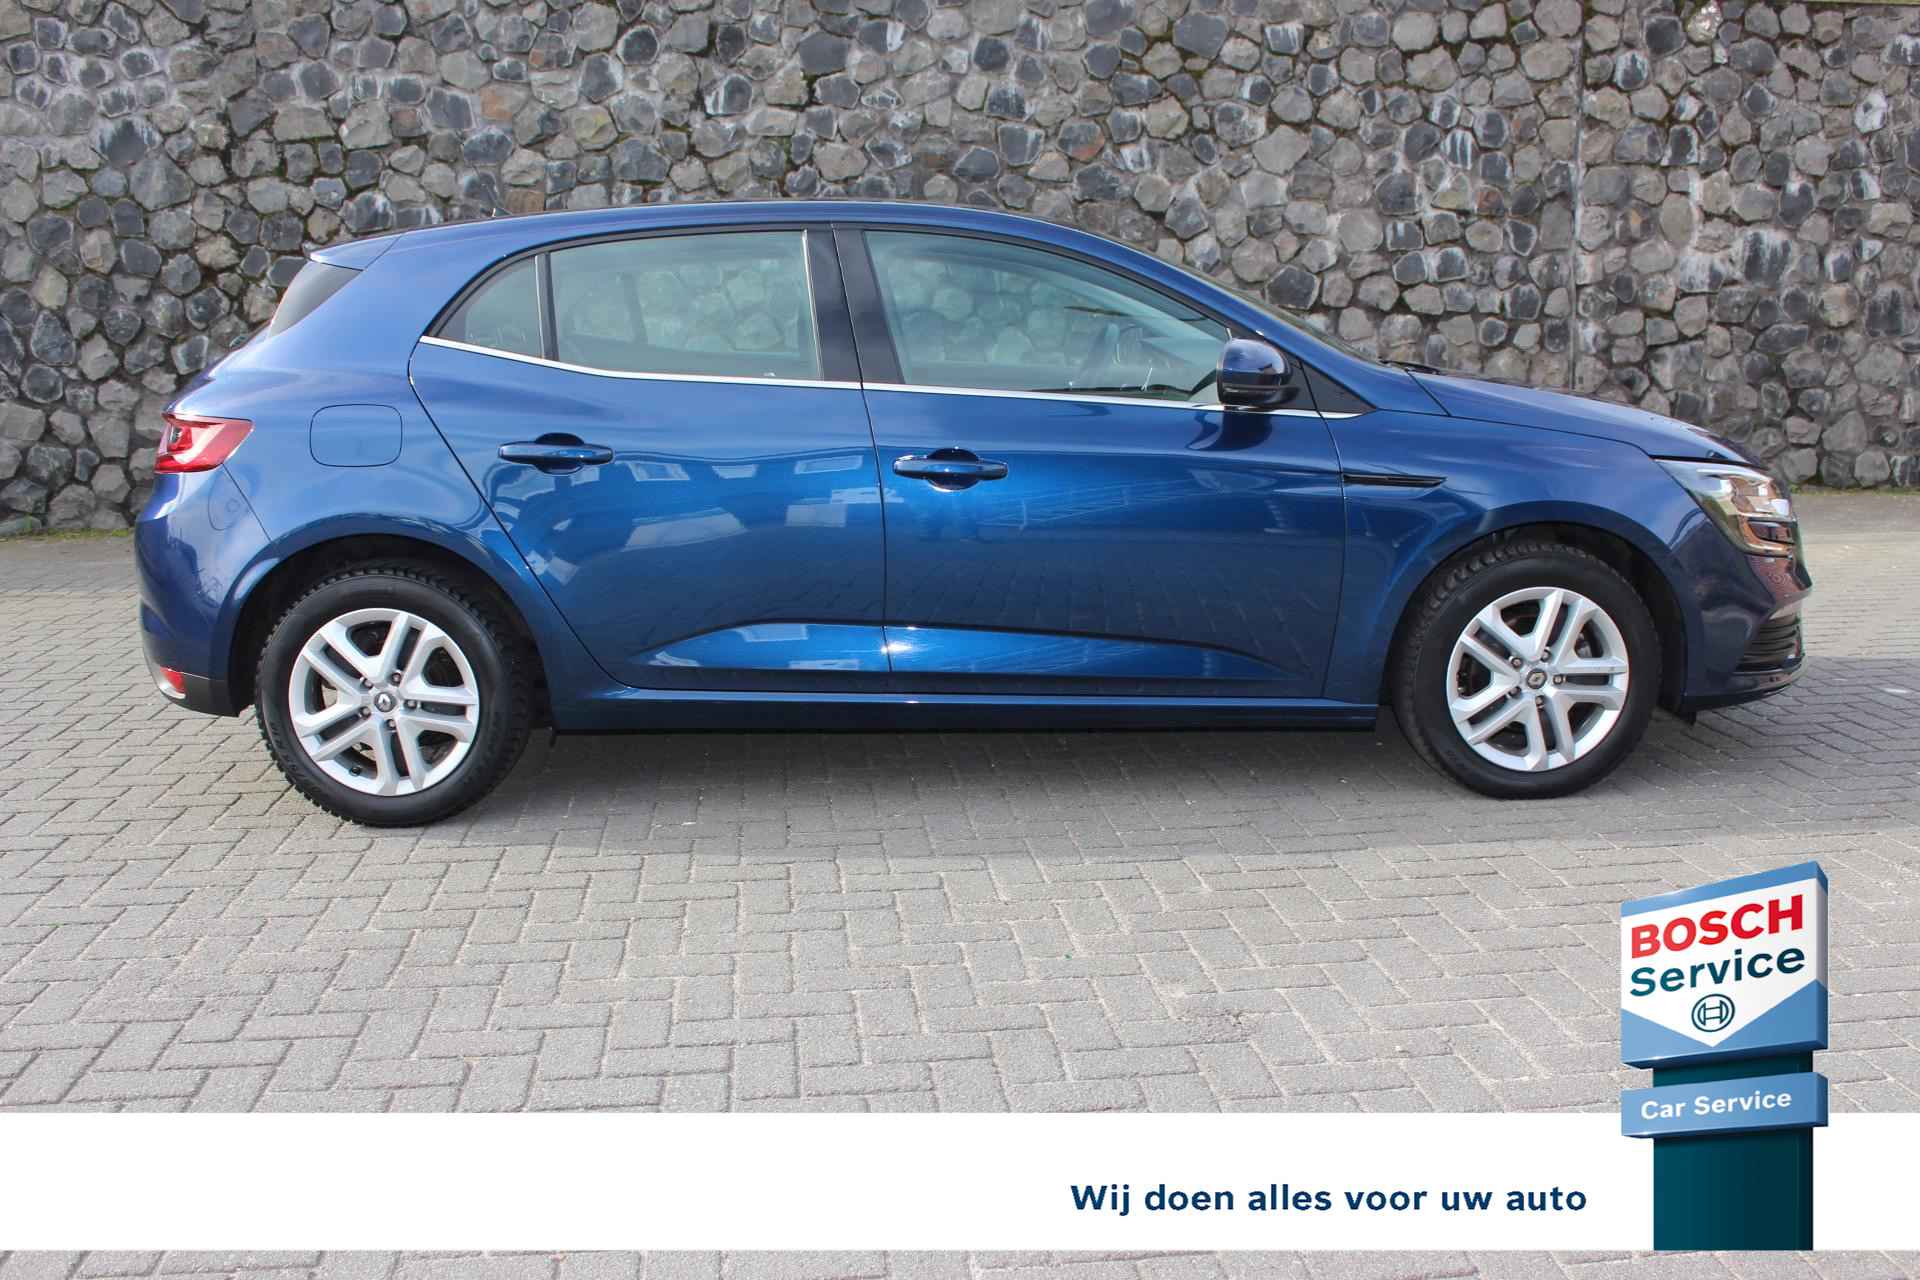 Renault Mégane 1.3 TCe Zen Dab+ audio Climate + cruise control Navi PDC achter Led verlichting voor + achter - 16/34